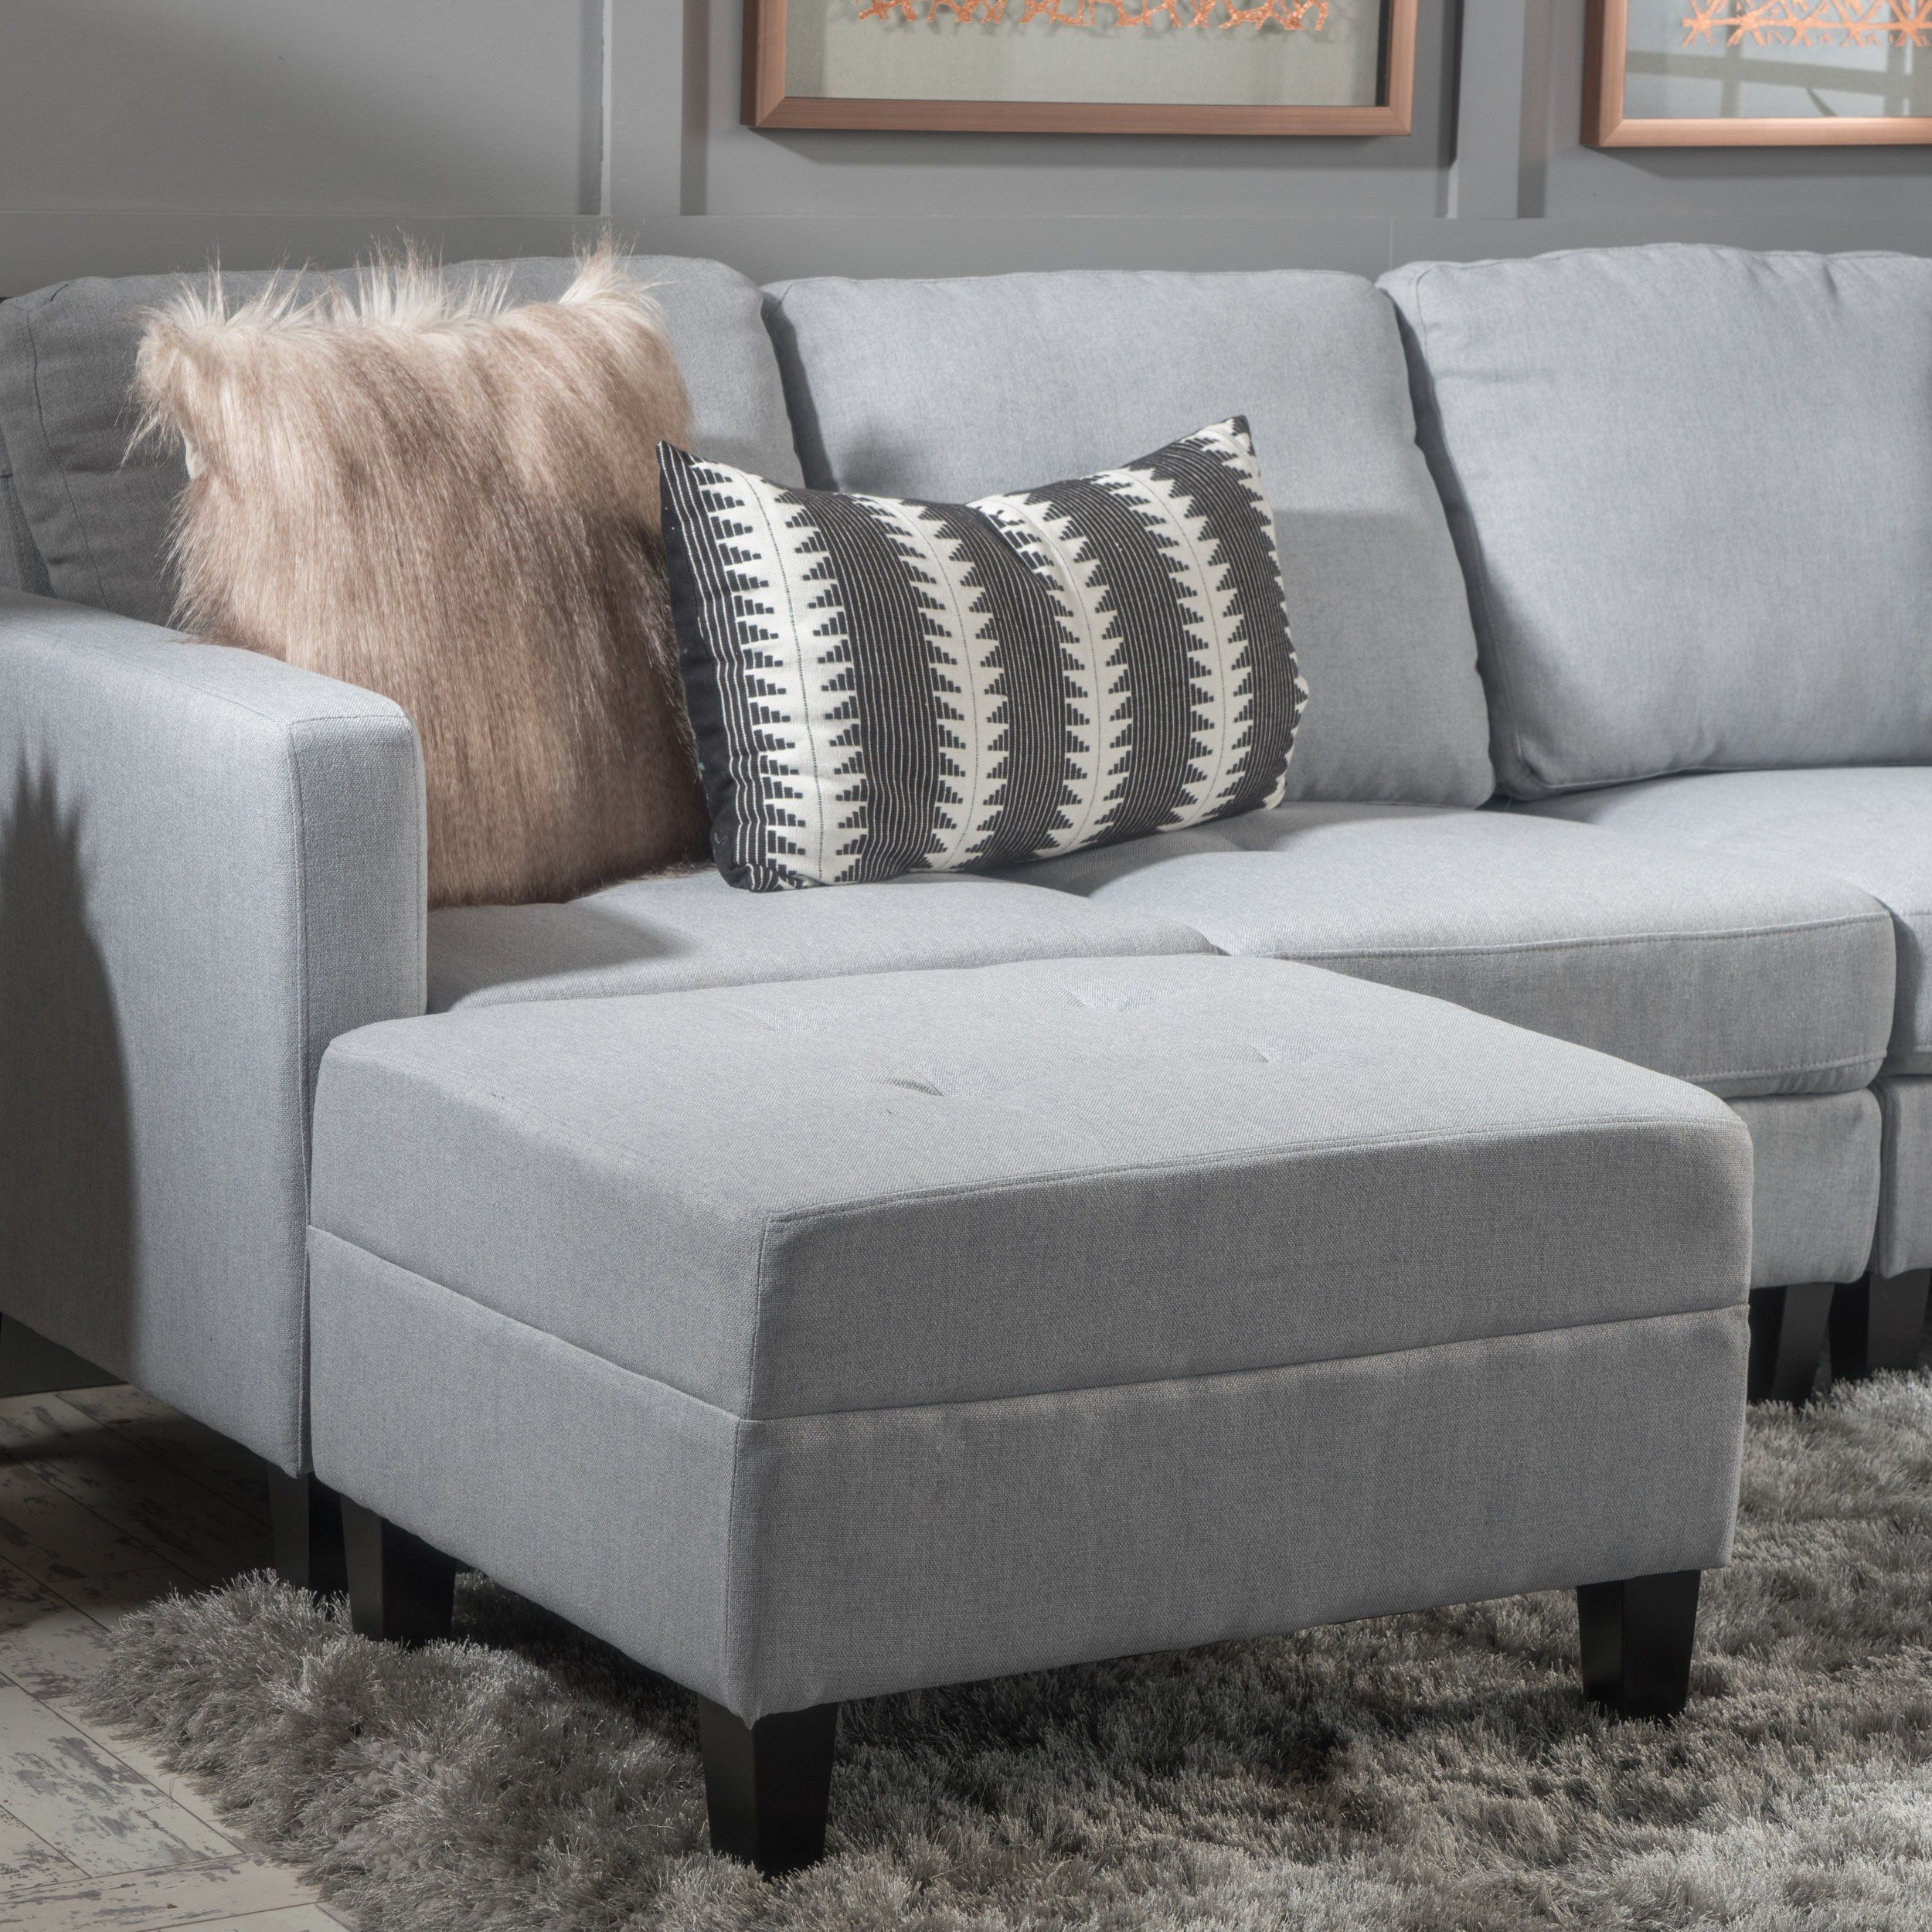 Carolina Light Grey Fabric Sectional Couch With Storage Ottoman In Light Gray Fold Out Sleeper Ottomans (Gallery 20 of 20)